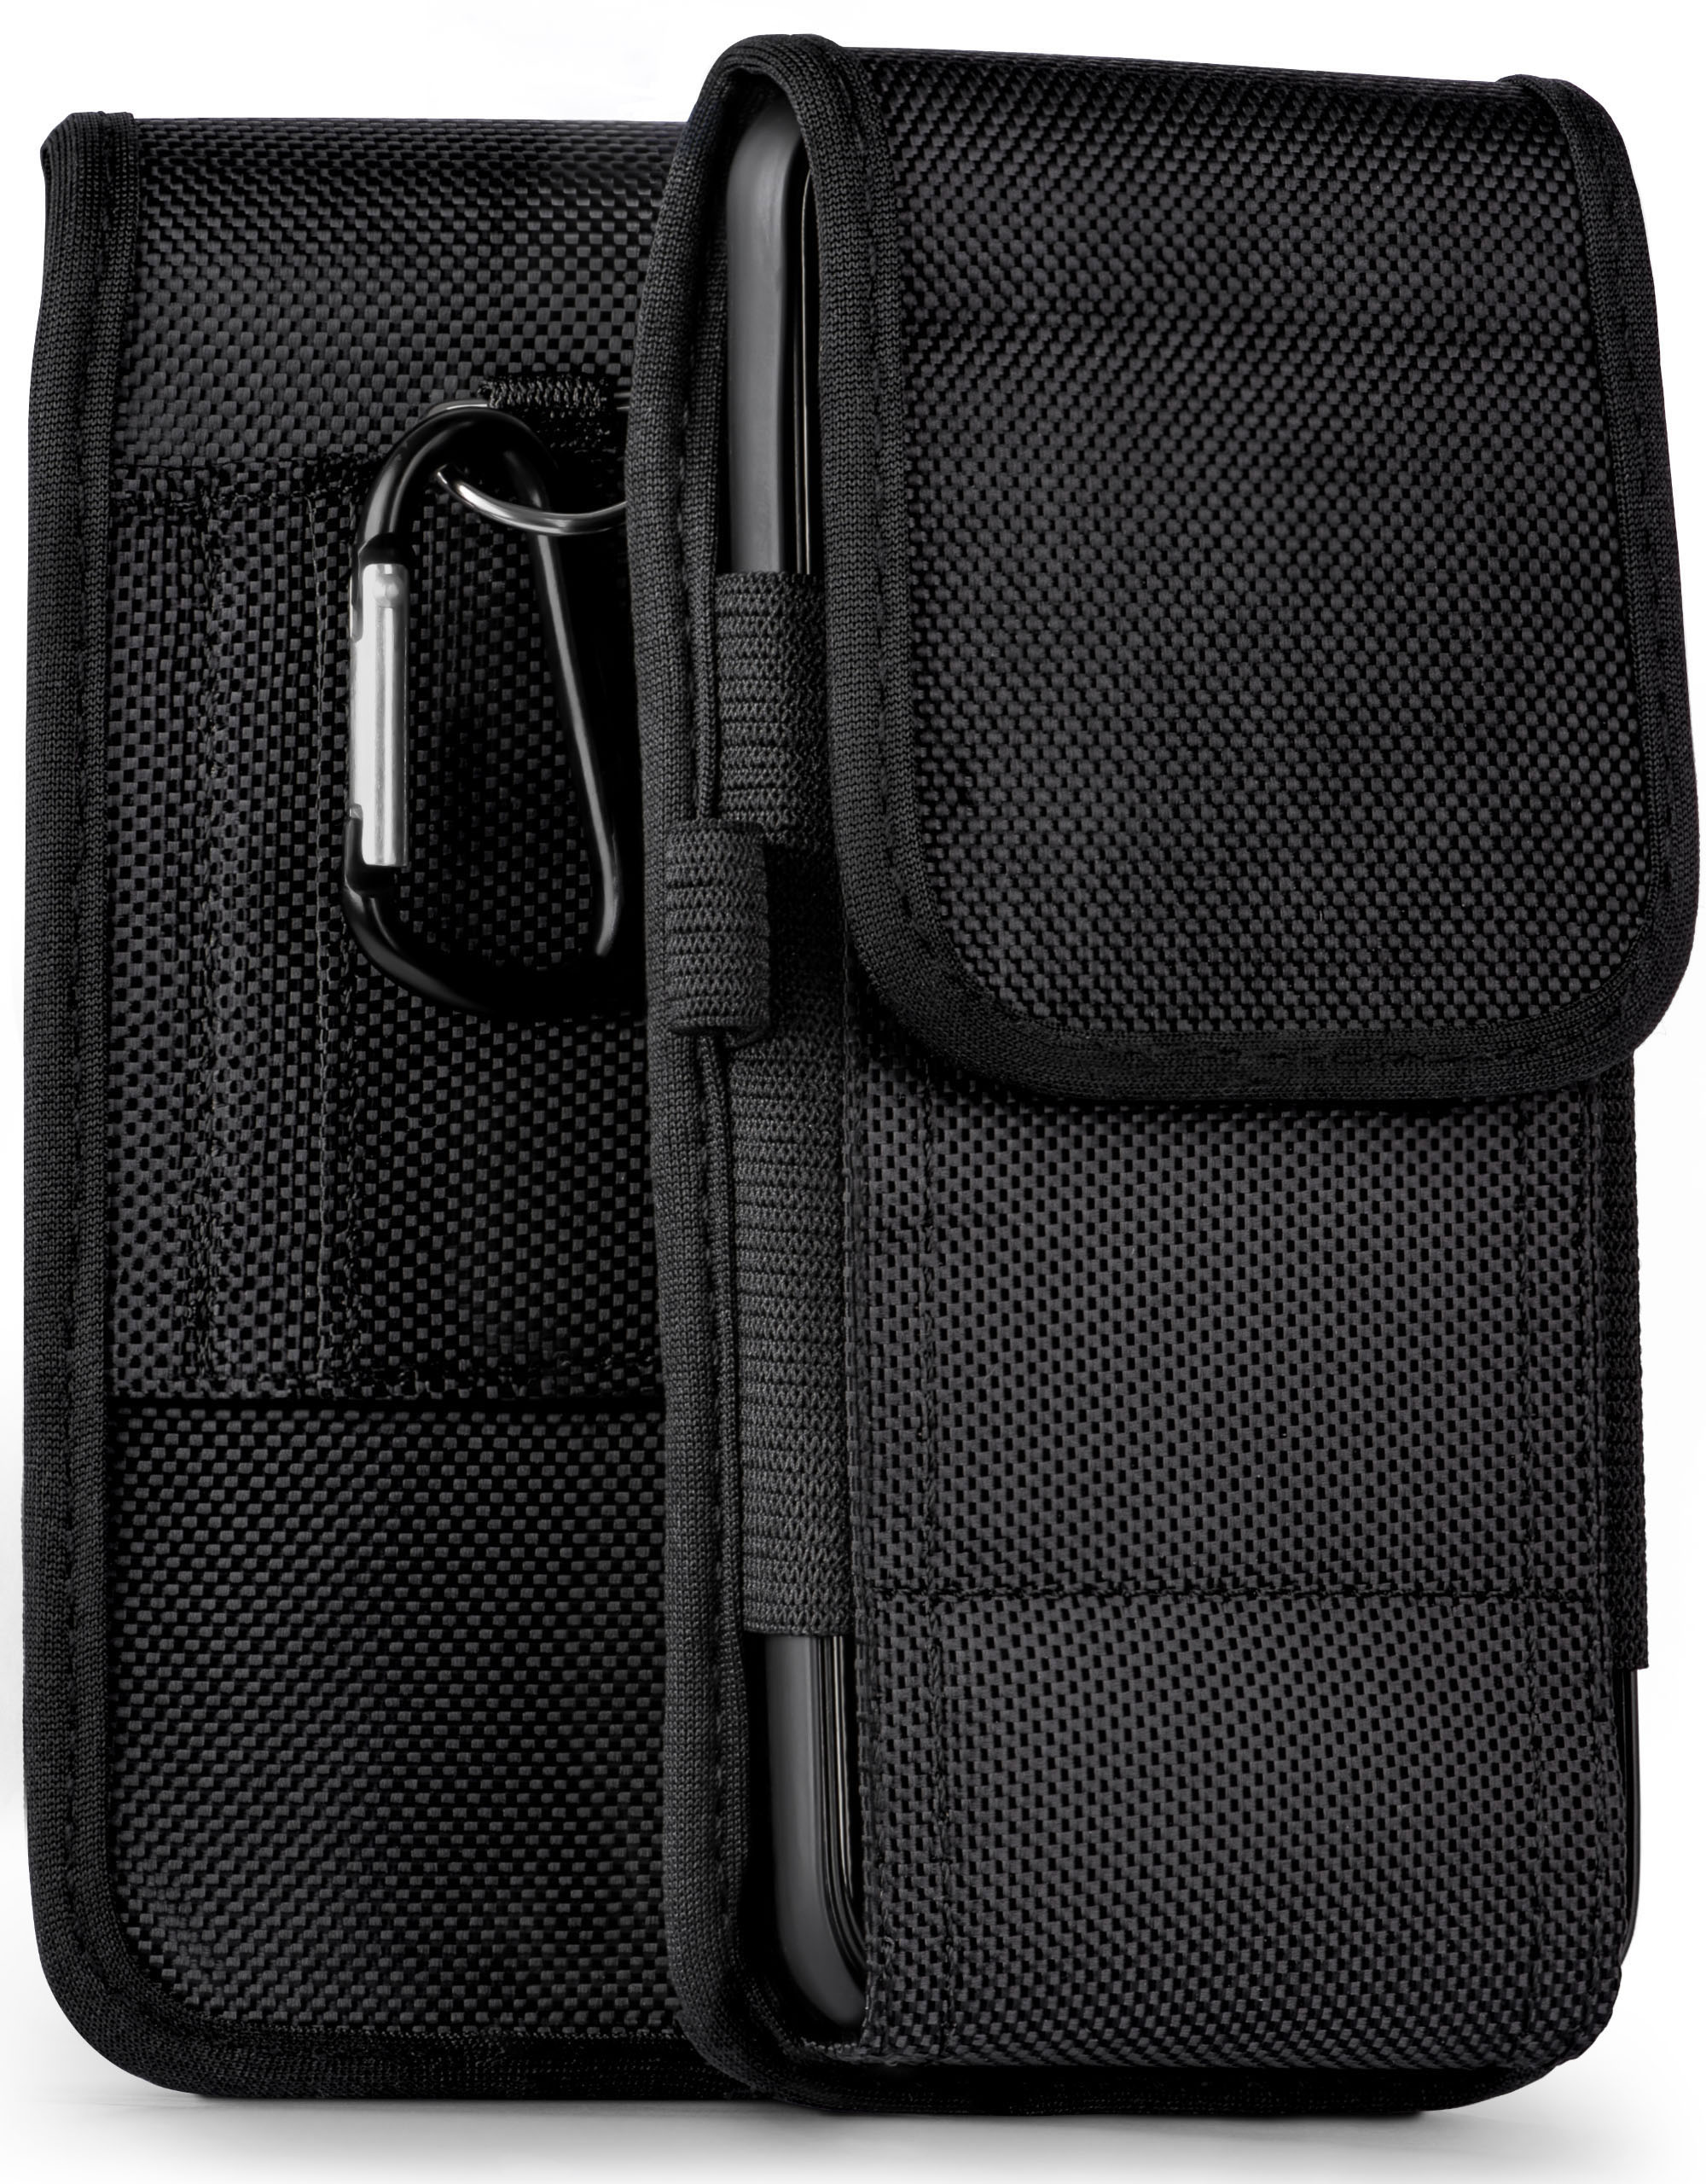 Agility MOEX Note 7, Case, Cubot, Holster, Trail